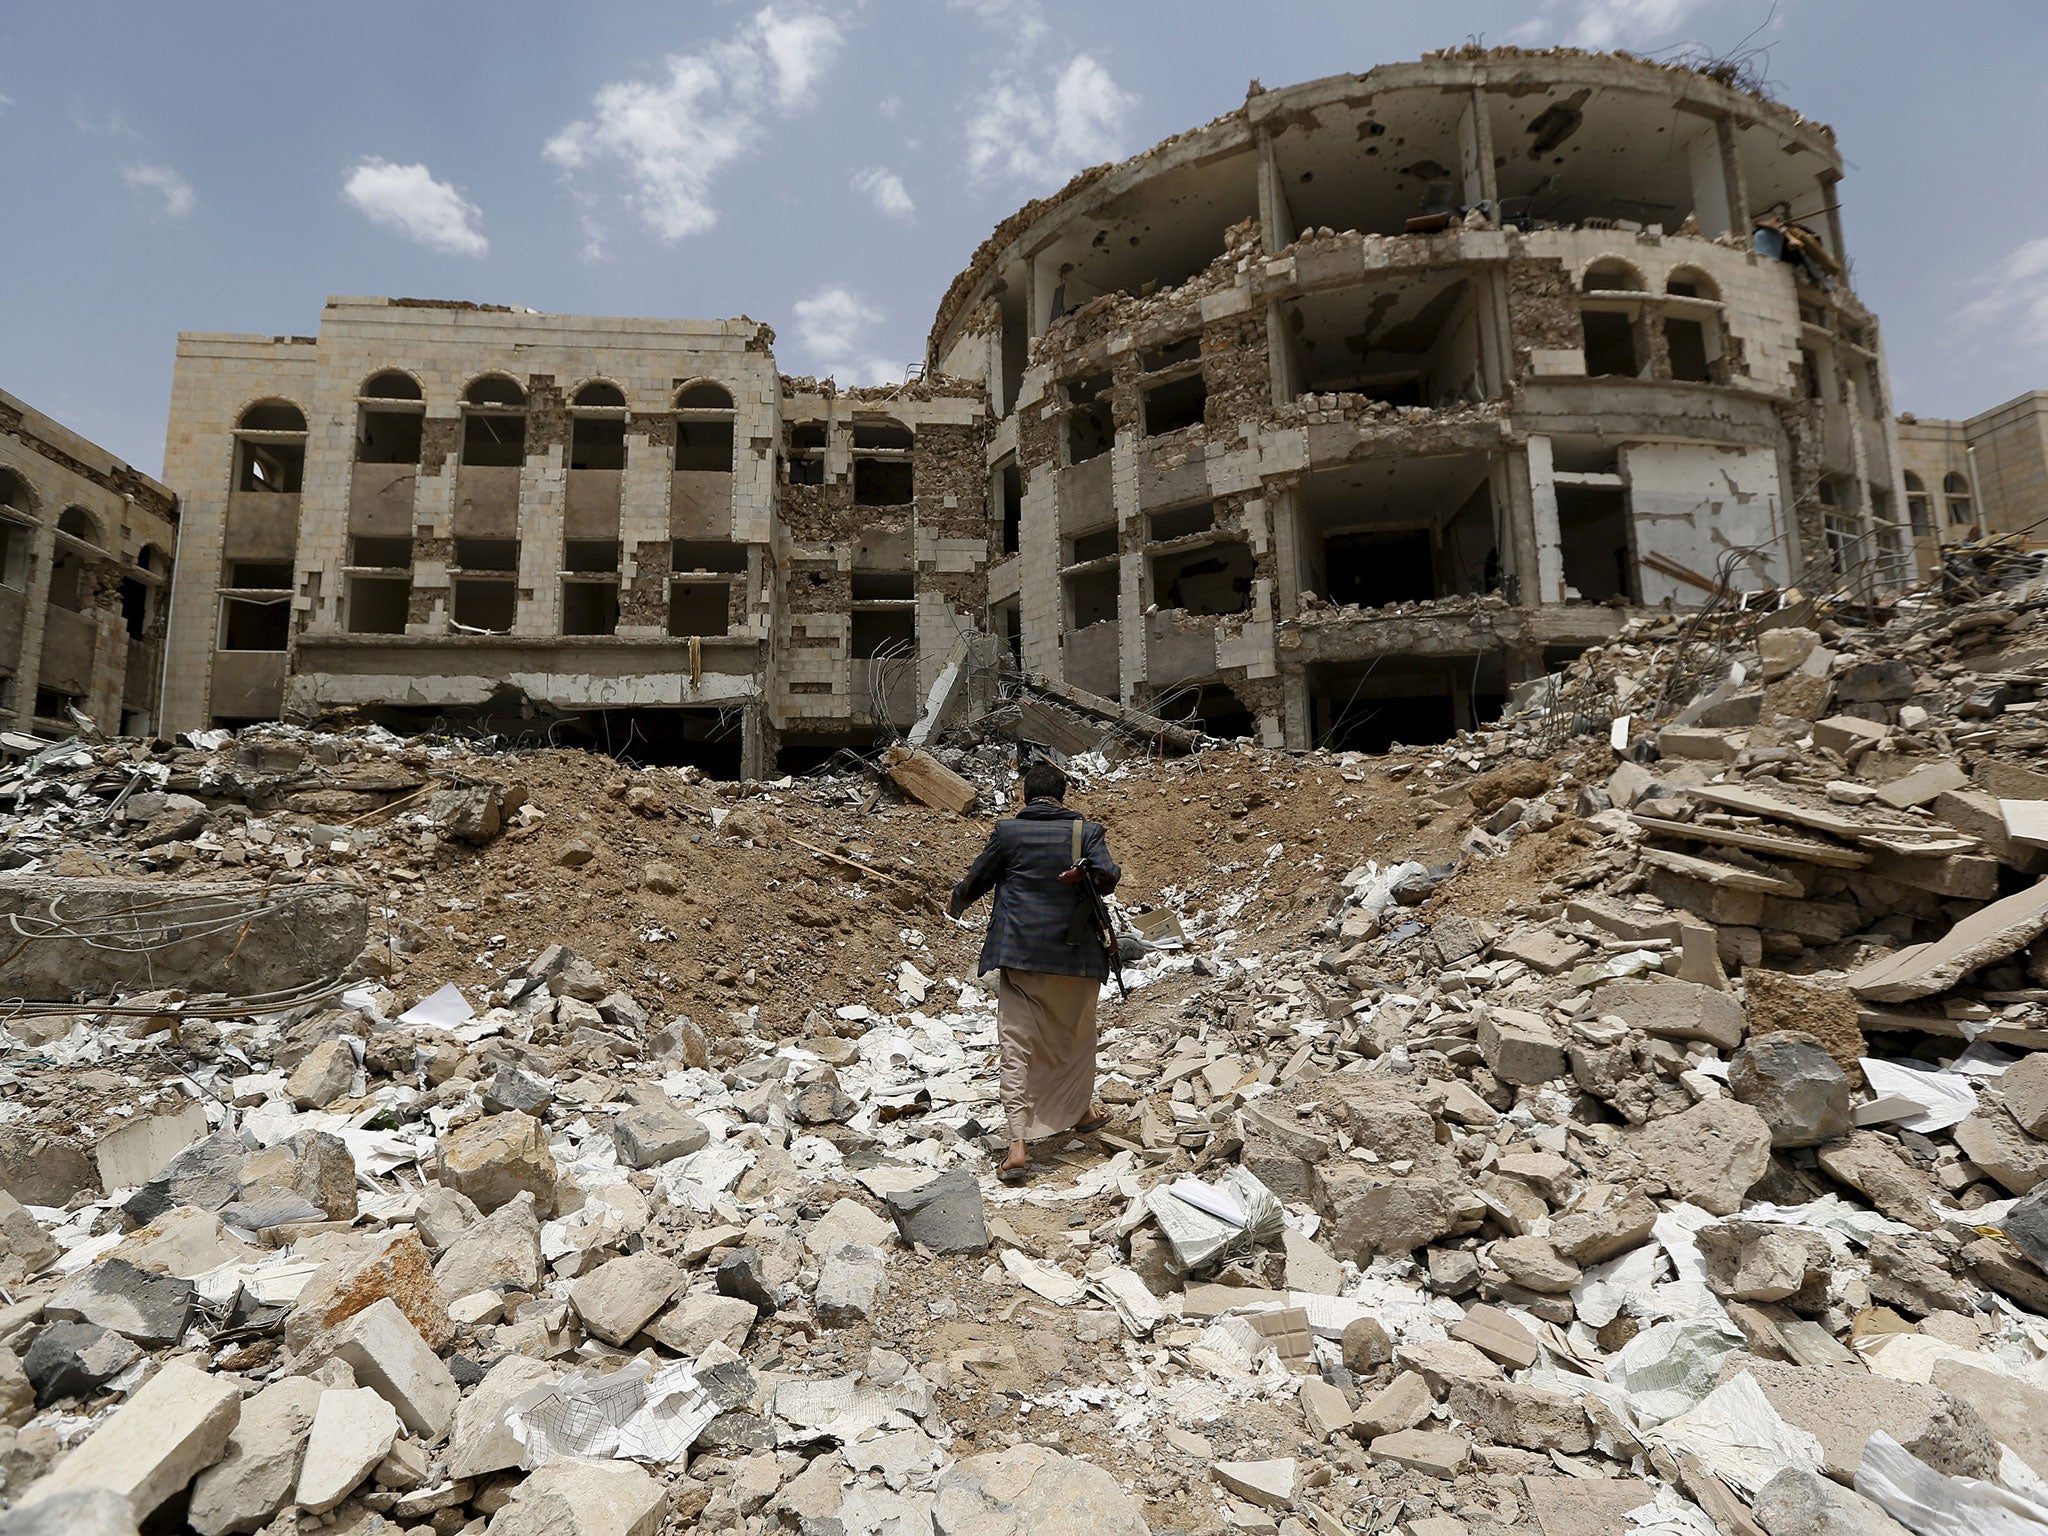 A Houthi militant walks in front of a government compound, destroyed by recent Saudi-led air strikes, in Yemen's northwestern city of Amran